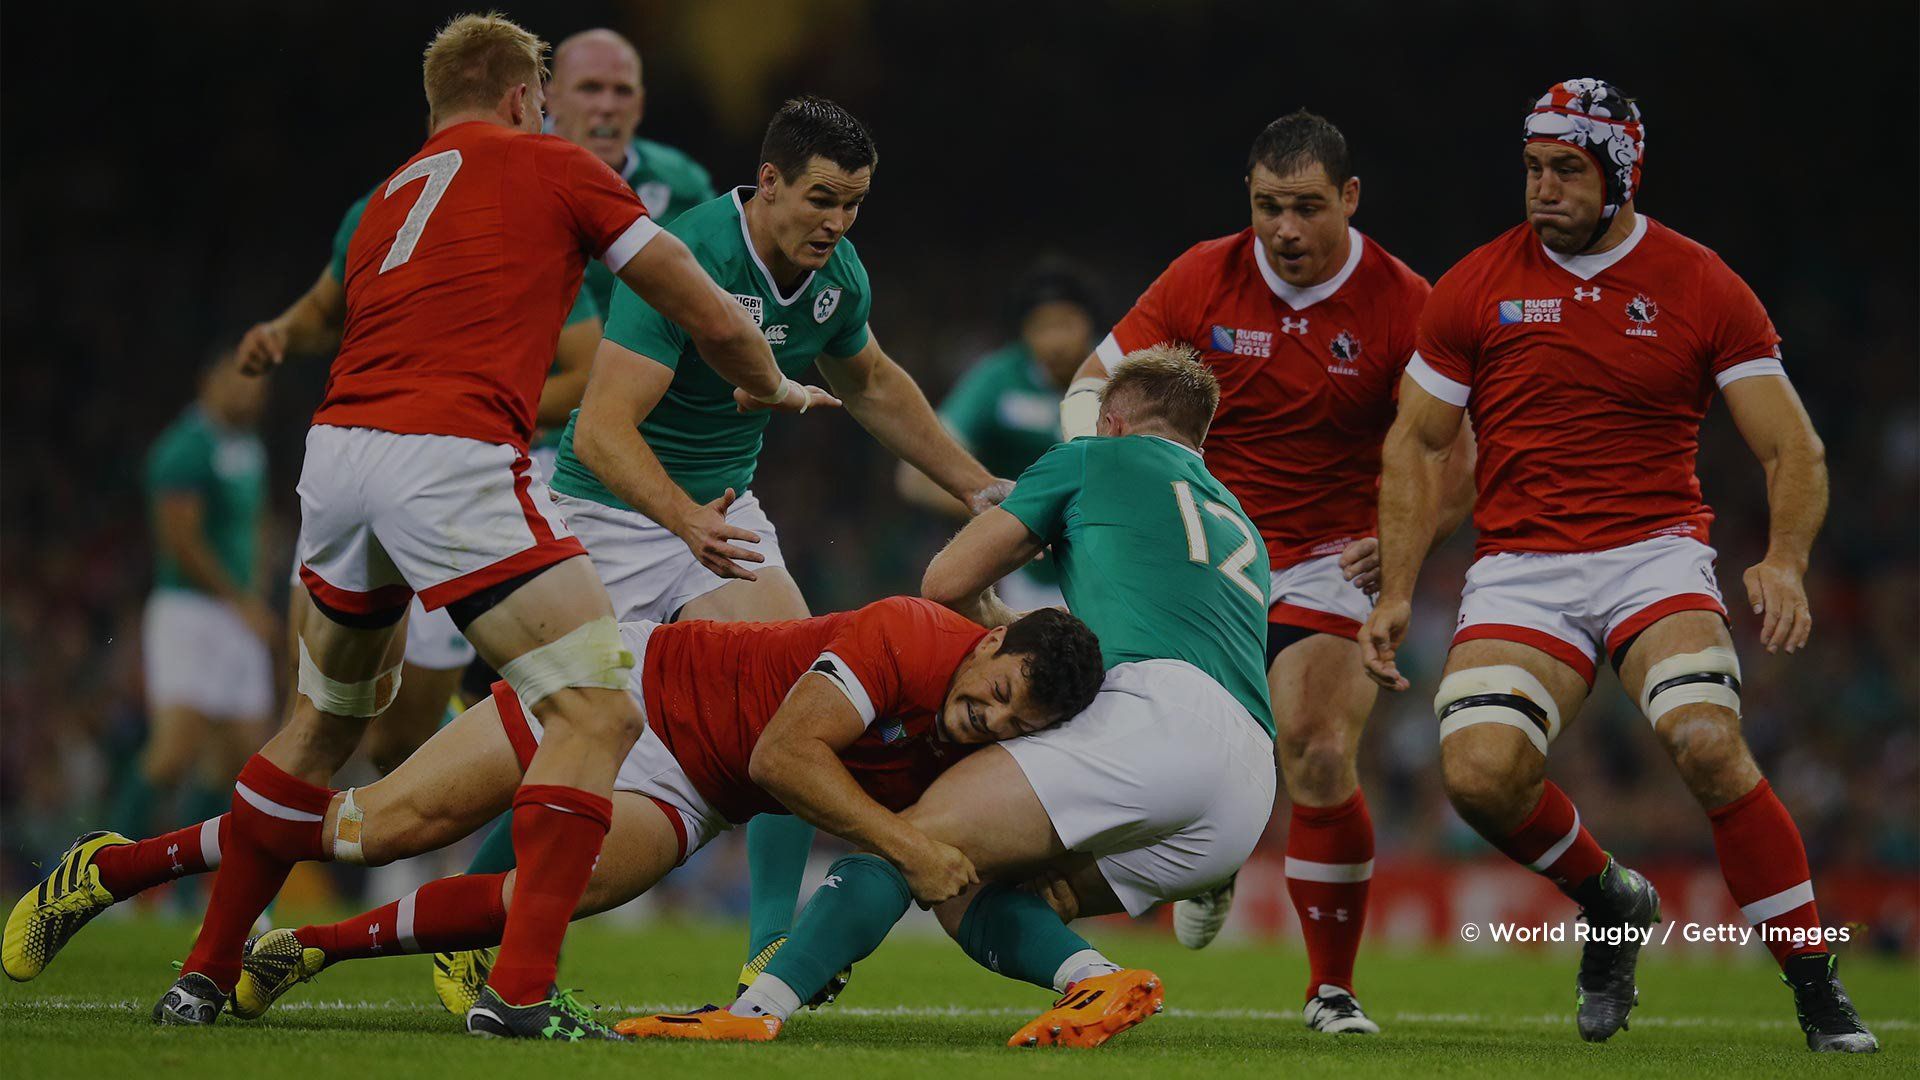 A Canadian player tackles an Irish player in a 2015 Rugby World Cup match. Photo by Richard Heathcote.